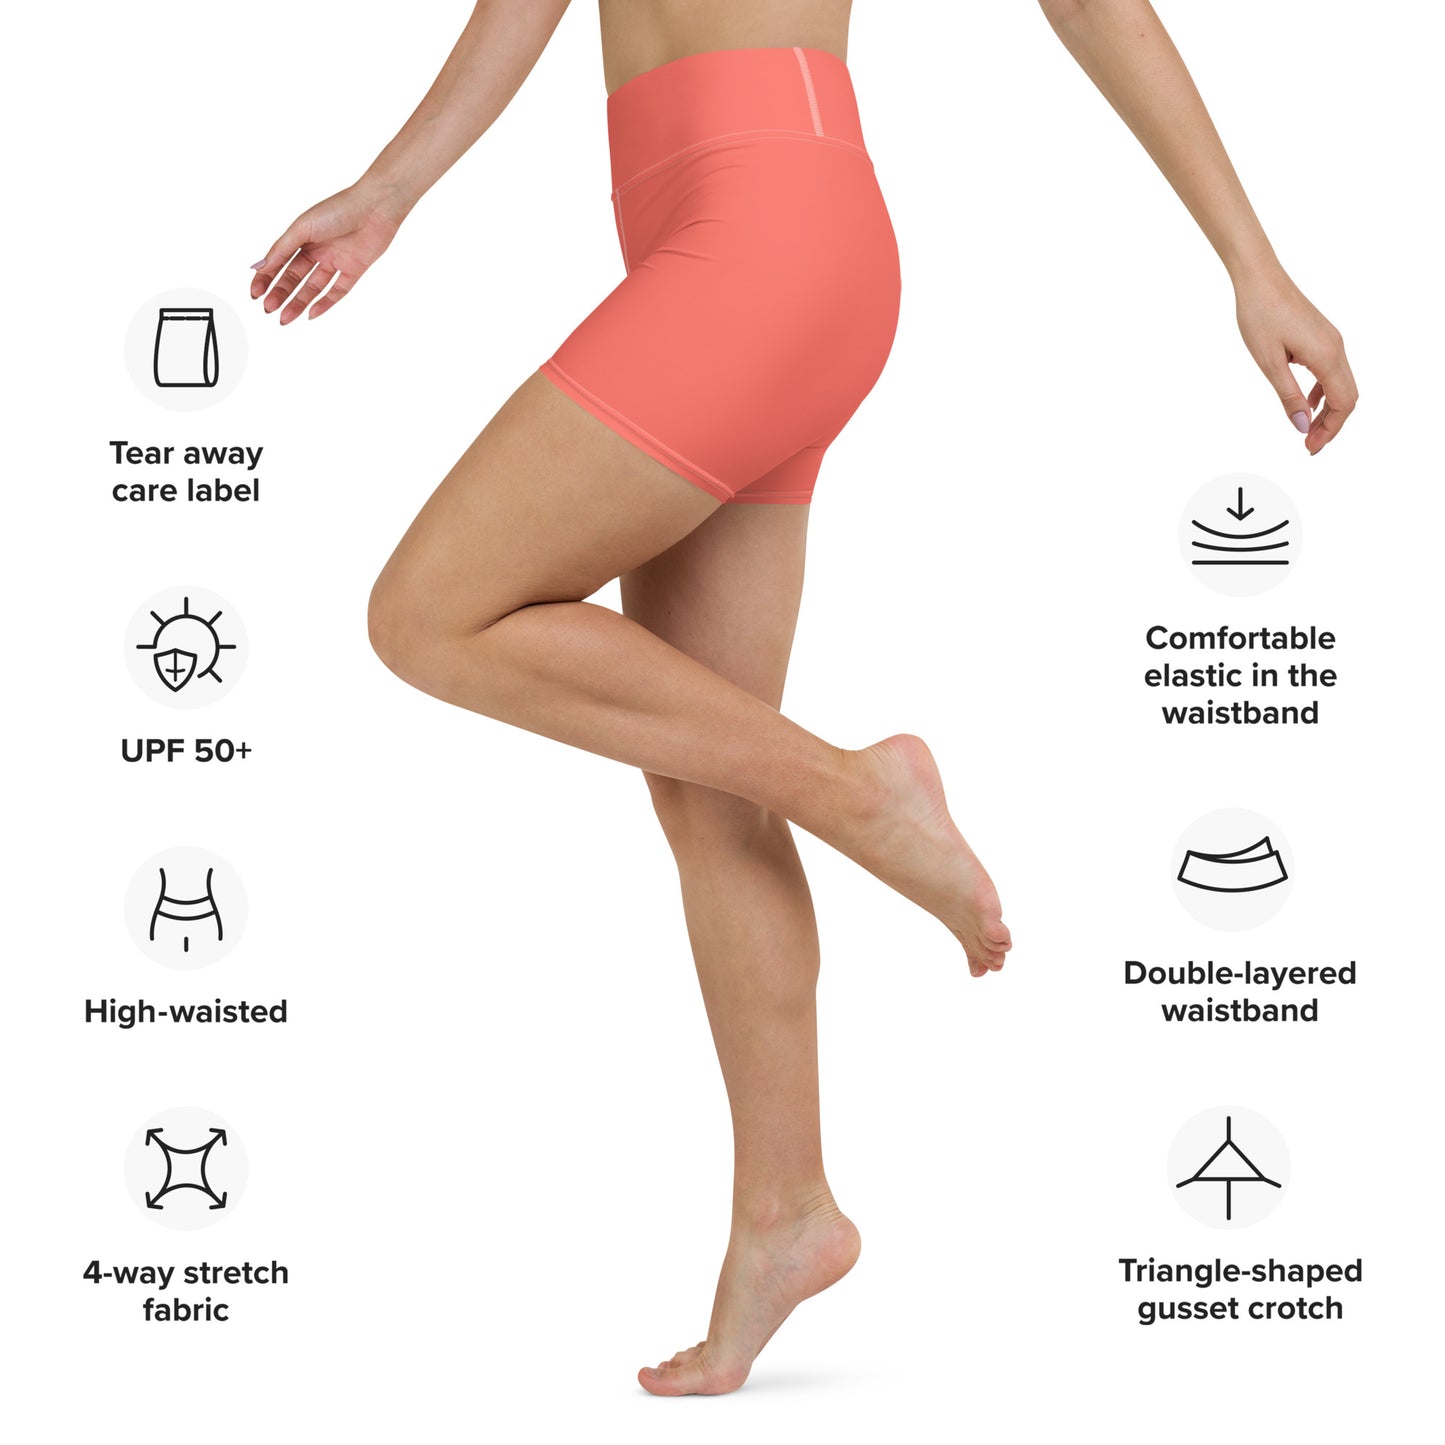 Coralo Solid Coral High Waist Yoga Shorts / Bike Shorts with Inside Pocket